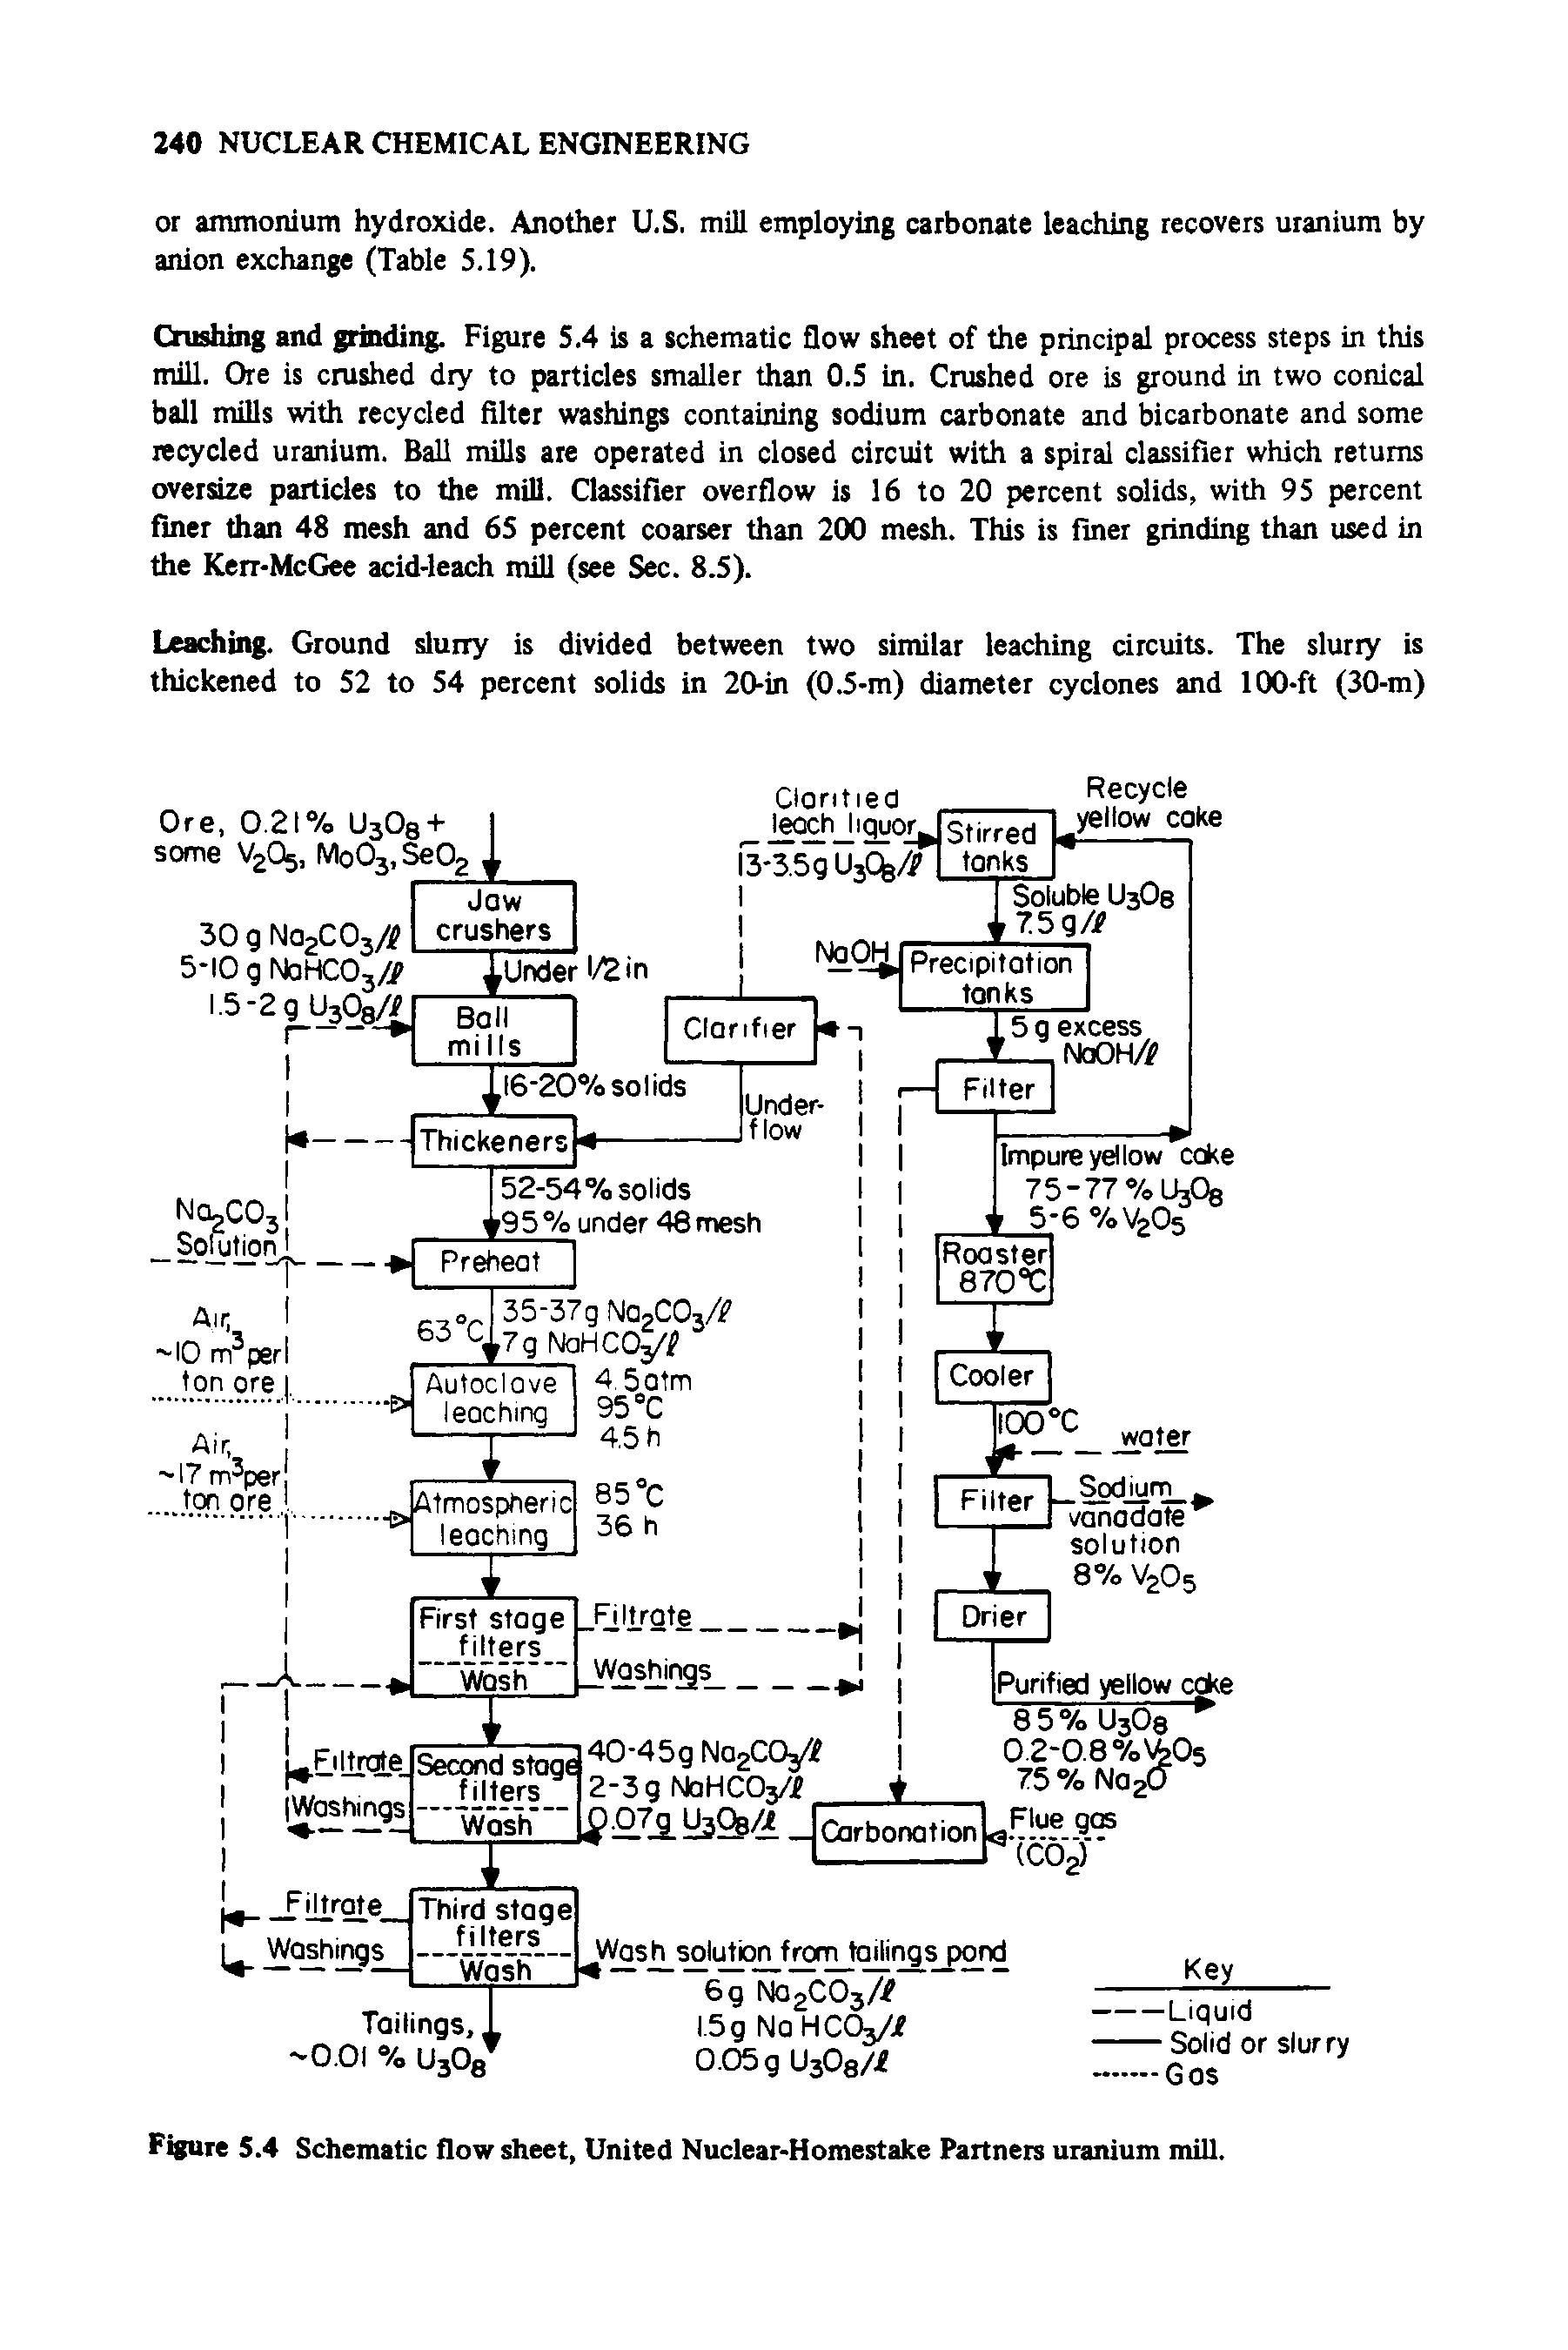 Figure 5.4 Schematic flow sheet, United Nuclear-Homestake Partners uranium mill.